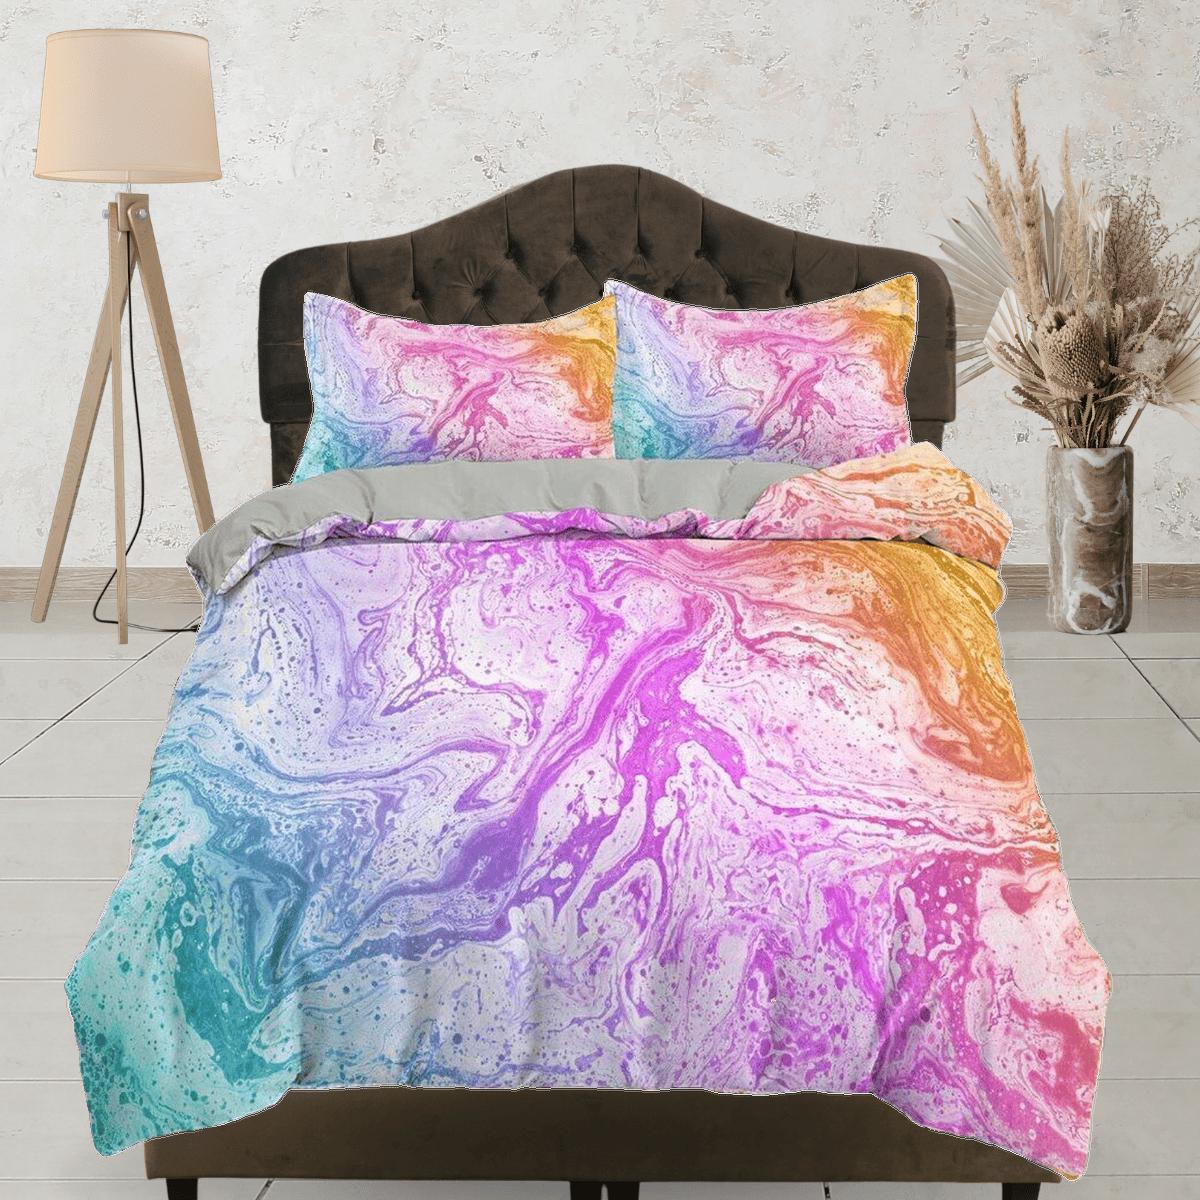 daintyduvet Contemporary bedroom set unicorn colors aesthetic duvet cover, alcohol ink abstract art room decor boho chic bedding set full king queen